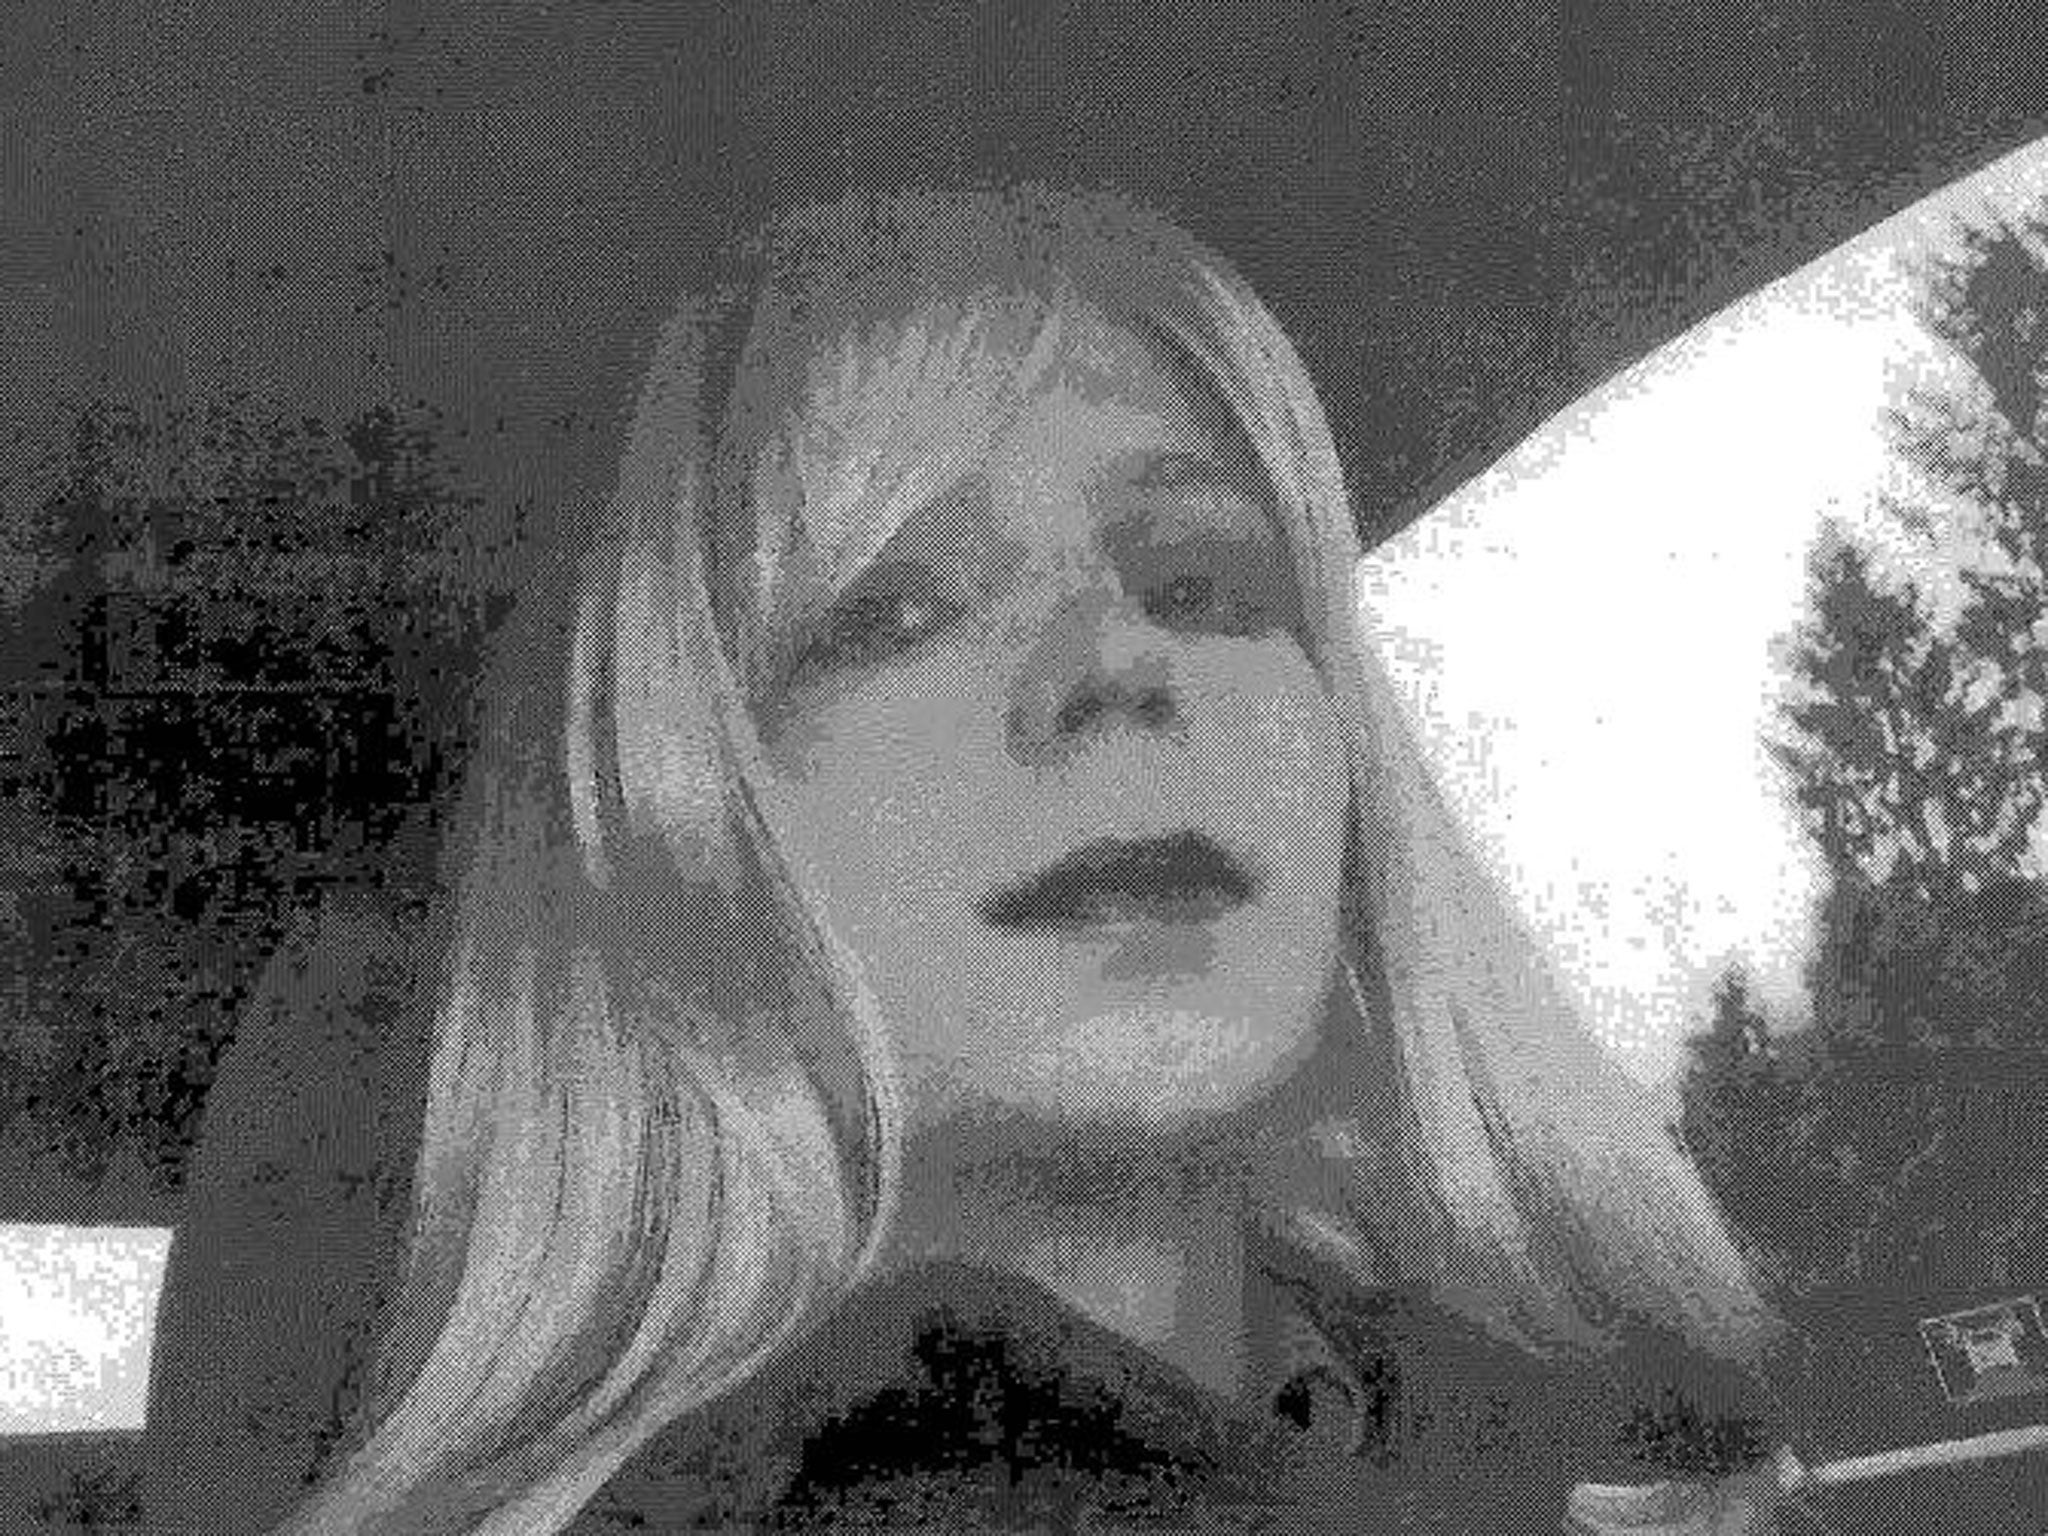 Chelsea Manning was detained for 7 years&nbsp;